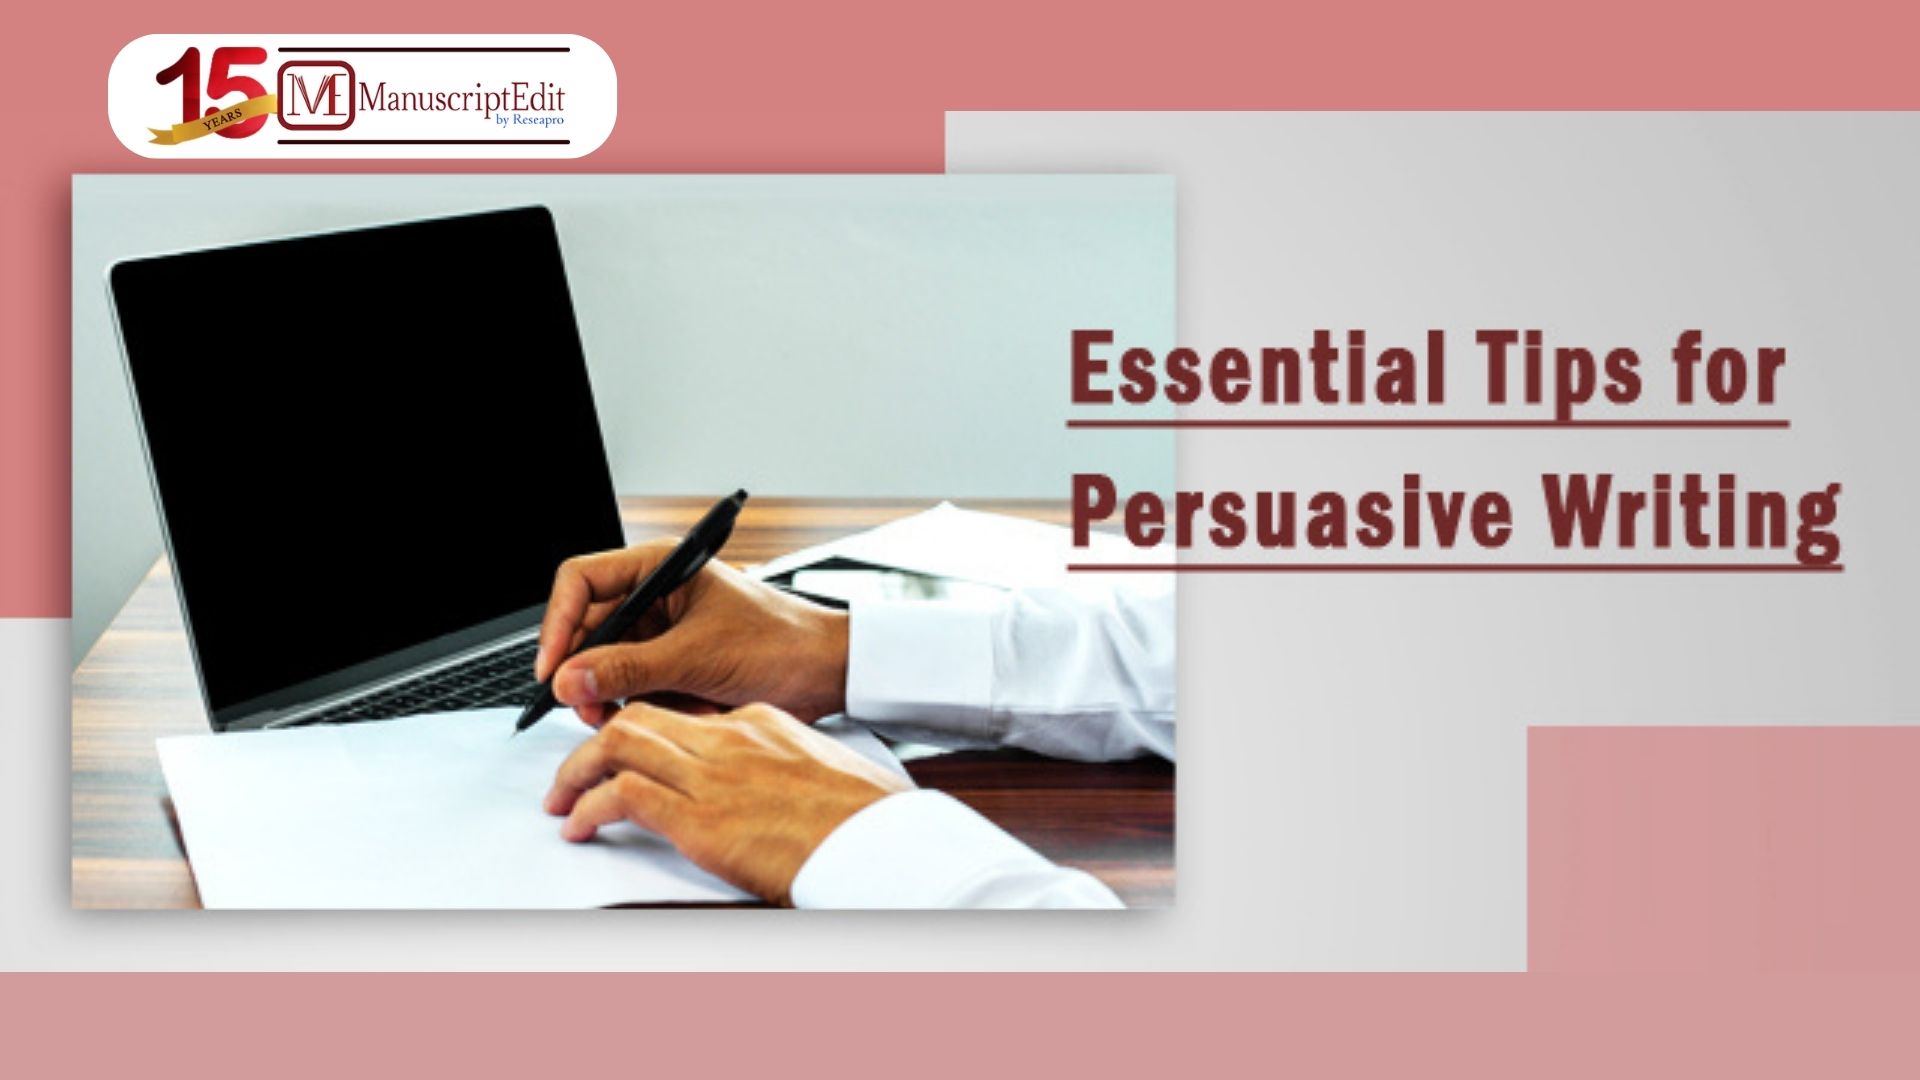 Essential Tips for Persuasive Writing